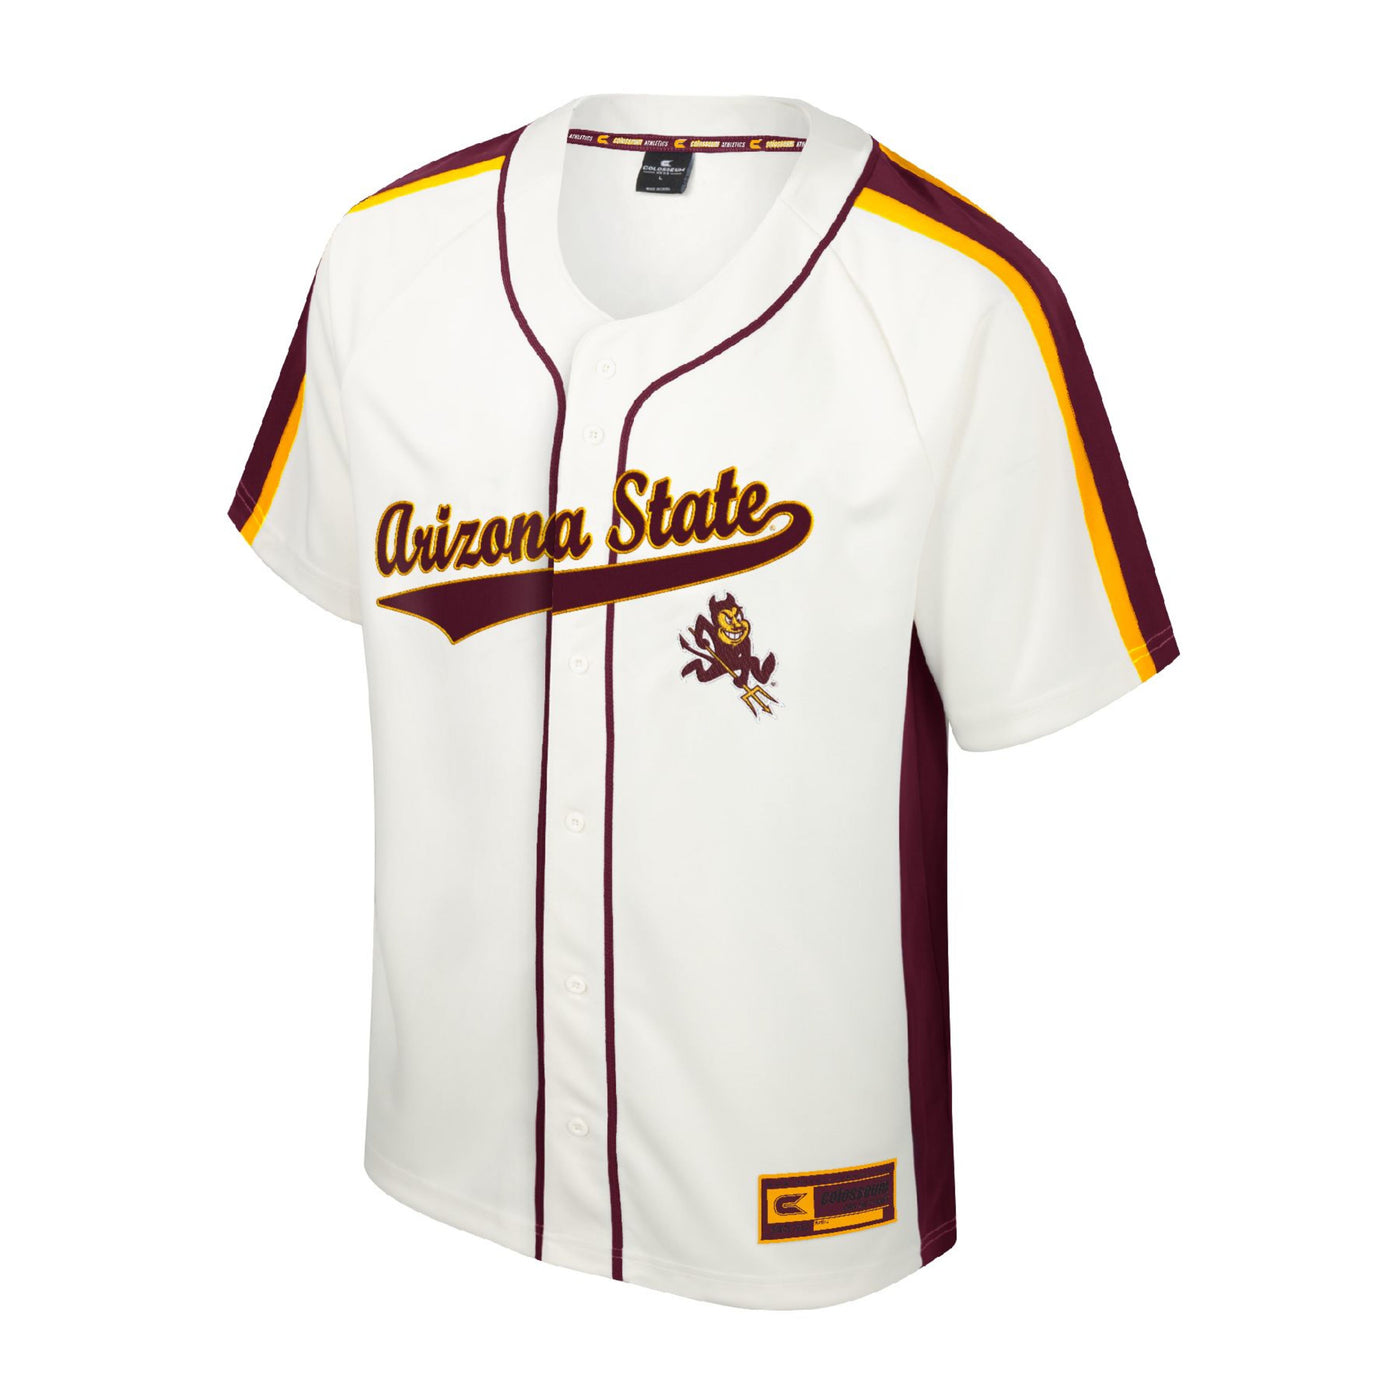 ASU youth white basketball jersey with maroon trim down the button line.A thick maroon stripe down the shoulder and down the side on the shirt. on the shoulder the maroon stripe is surrounded by two gold stripes. On the fron of the jersey is the cursive text 